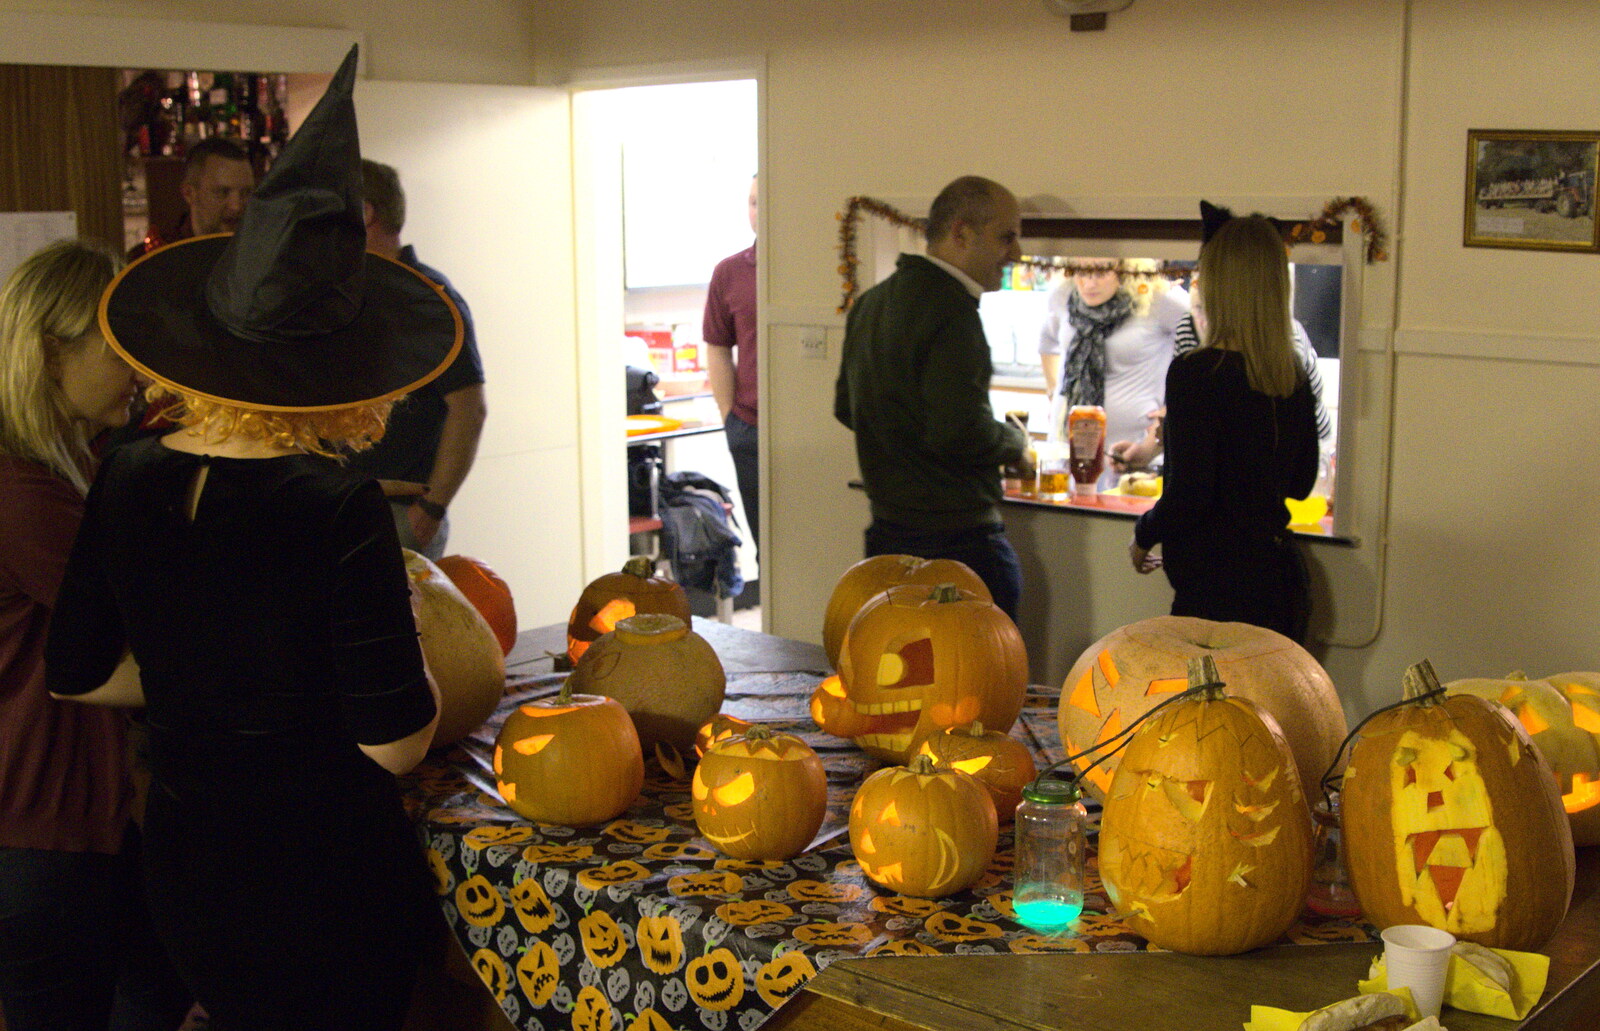 Pumpkins on the pool table from A Halloween Party at the Village Hall, Brome, Suffolk - 31st October 2014